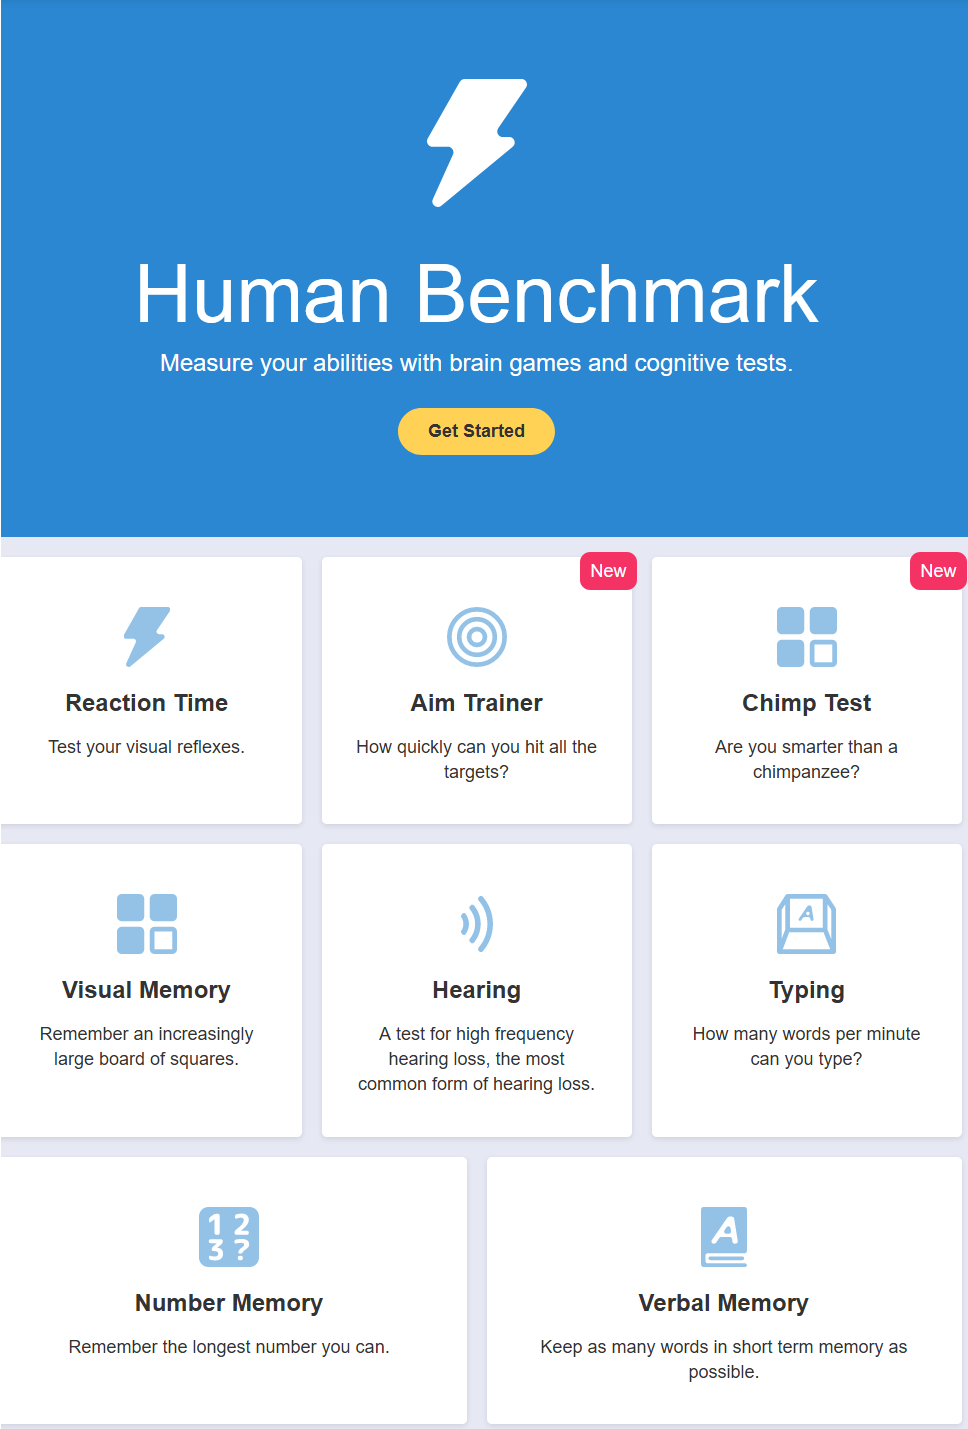 Comment your Human Benchmark Score! #fyp #valorant #humanbenchmark